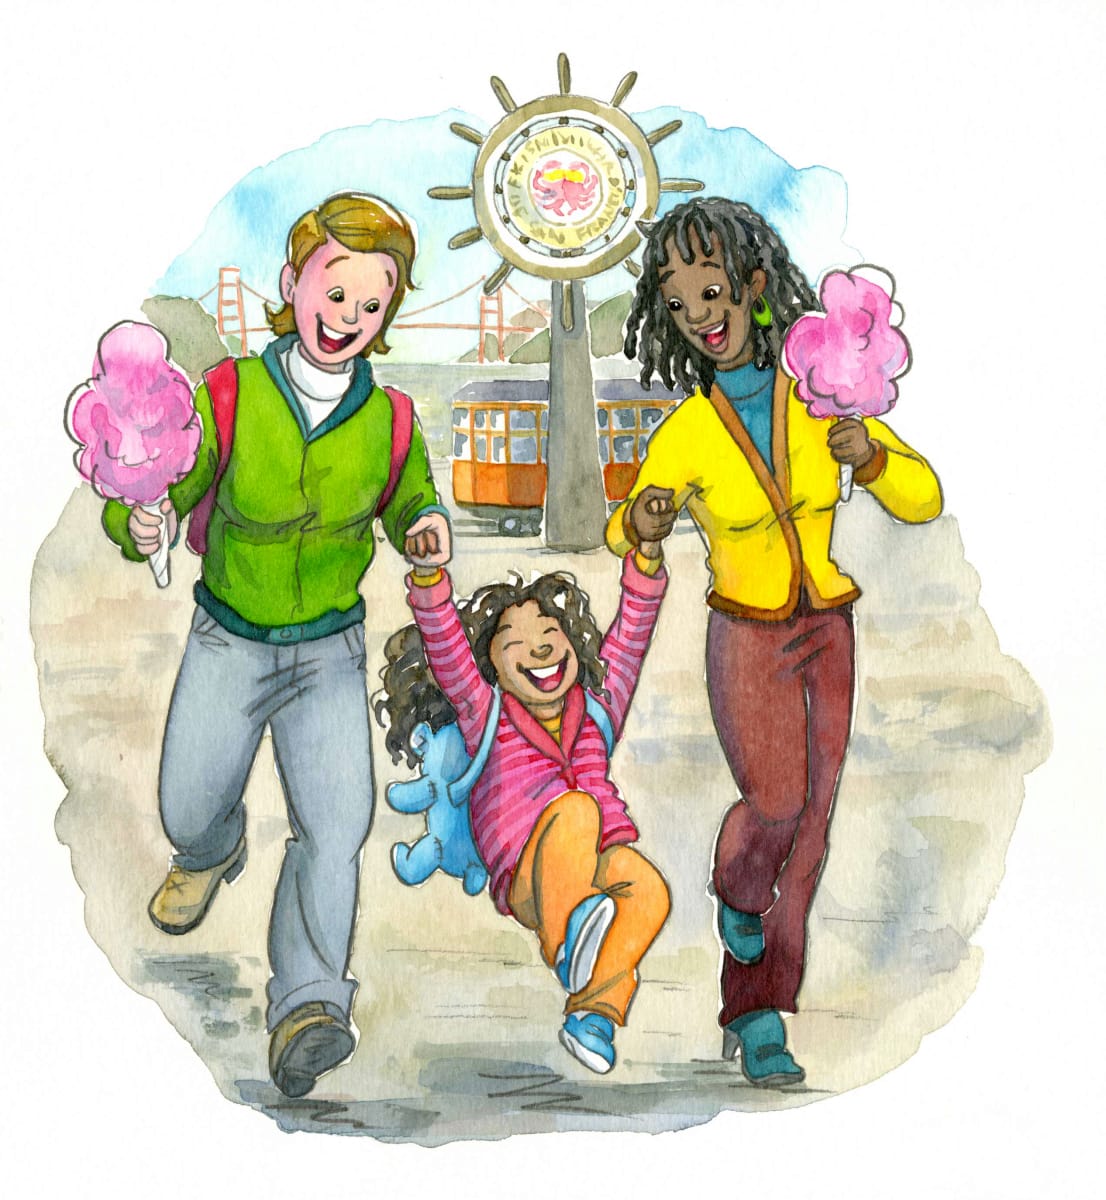 Two Moms with Cotton Candy  Image: Rainbow Rumpus magazine, out at the fair